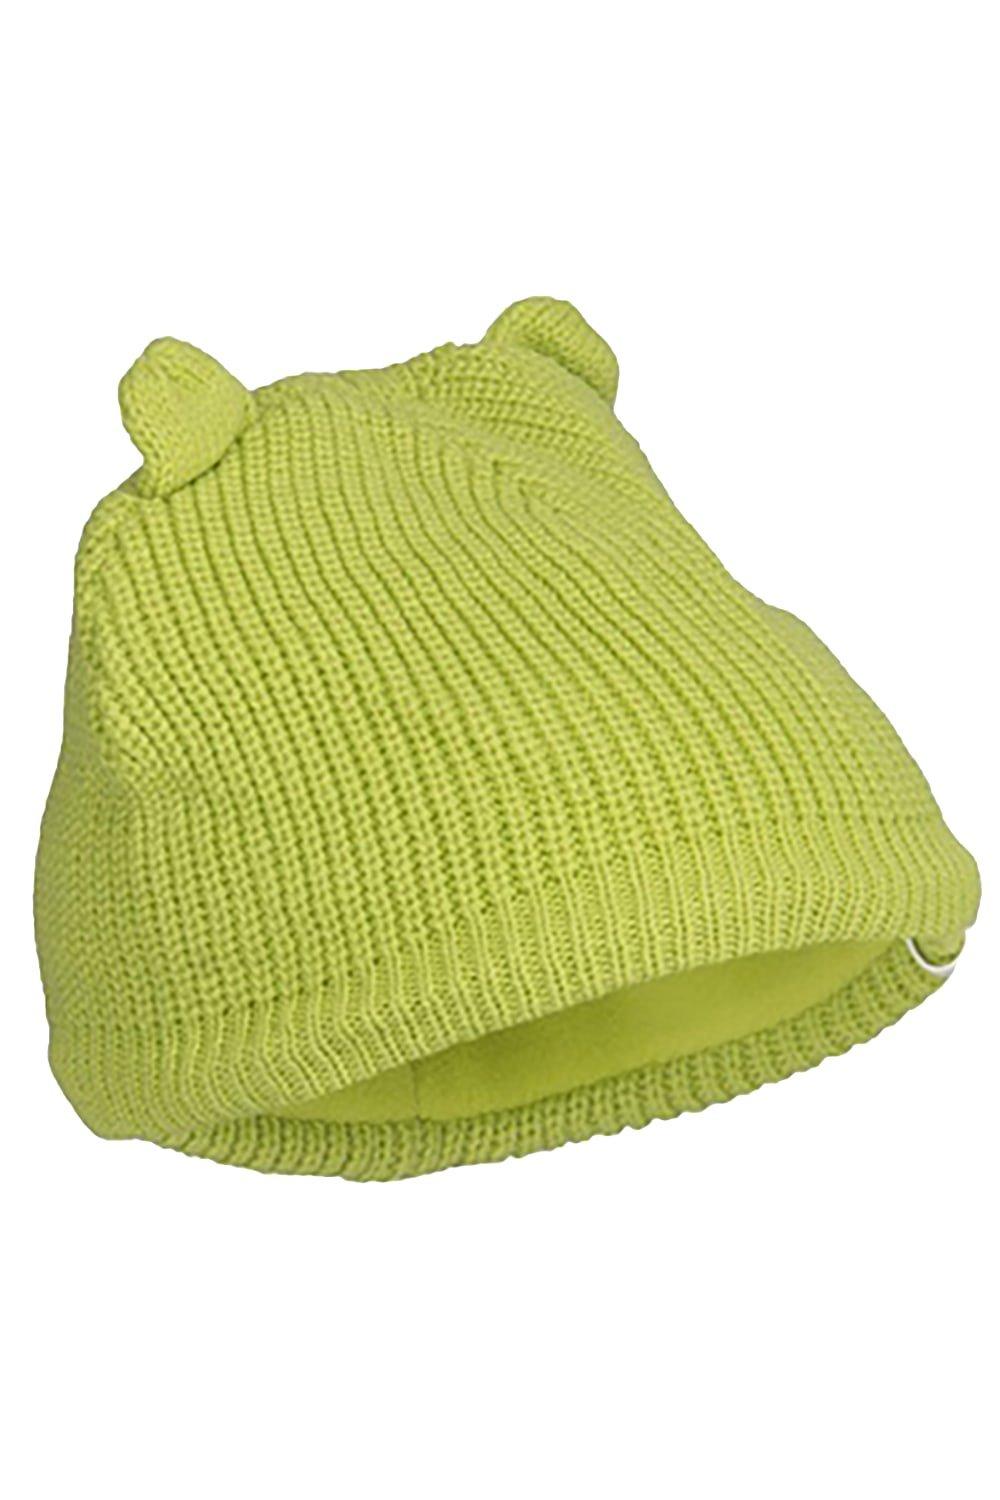 Toot Knitted Winter Beanie Hat